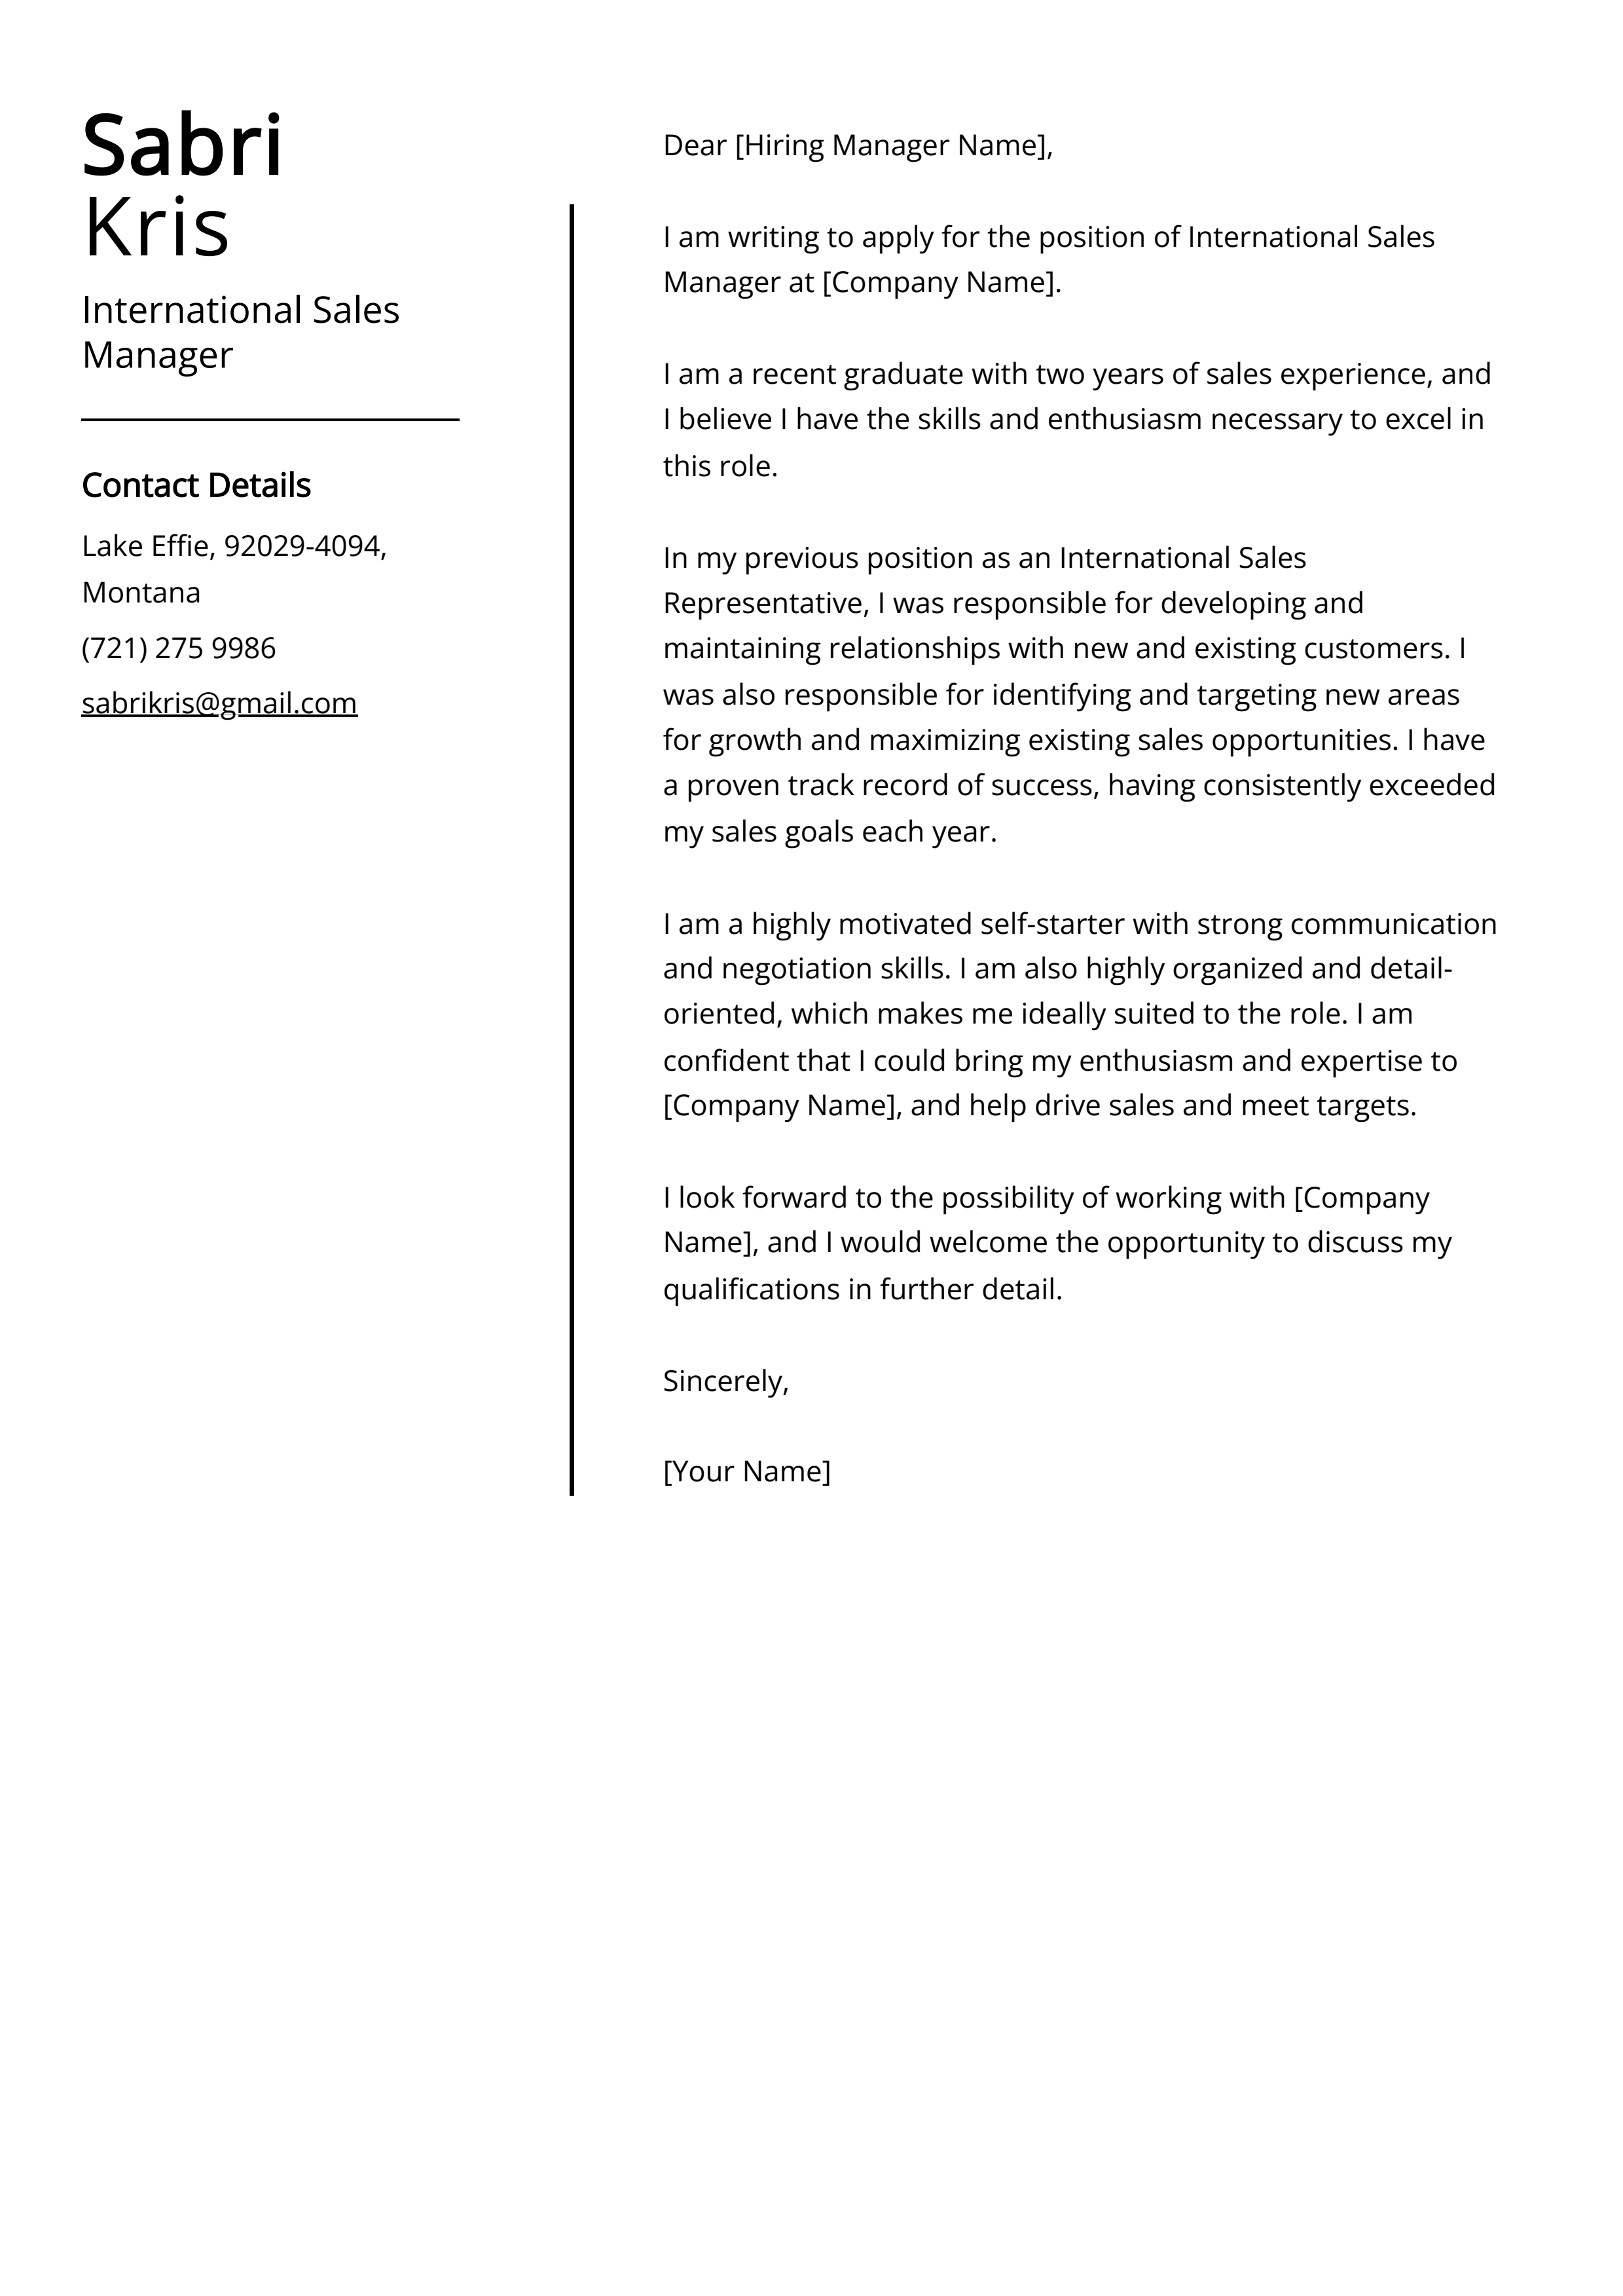 International Sales Manager Cover Letter Example